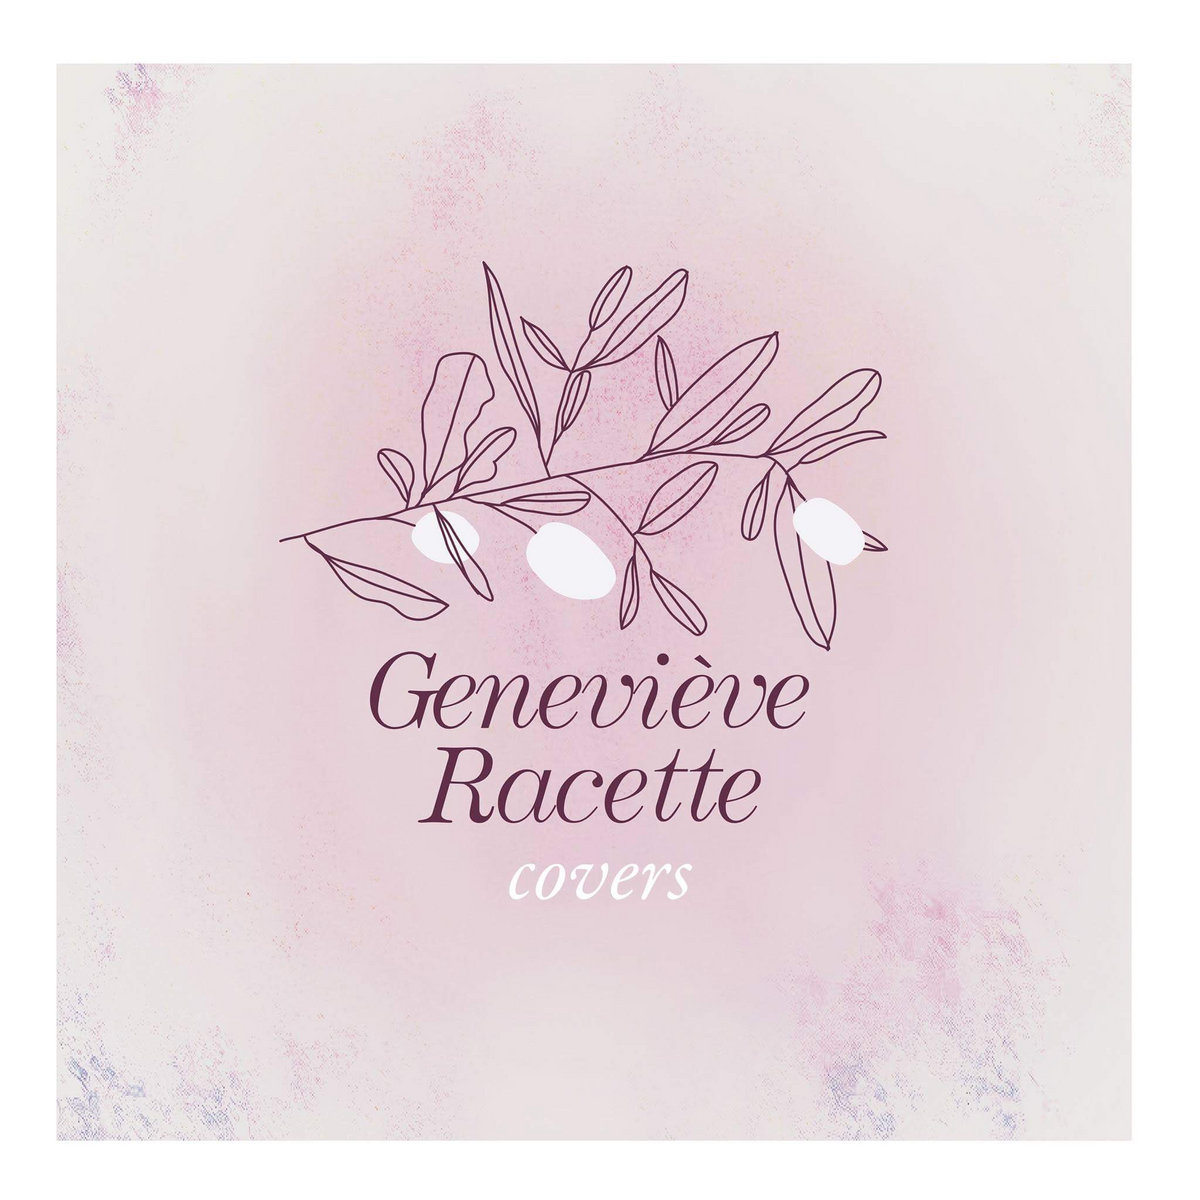 Covers Genevieve Racette